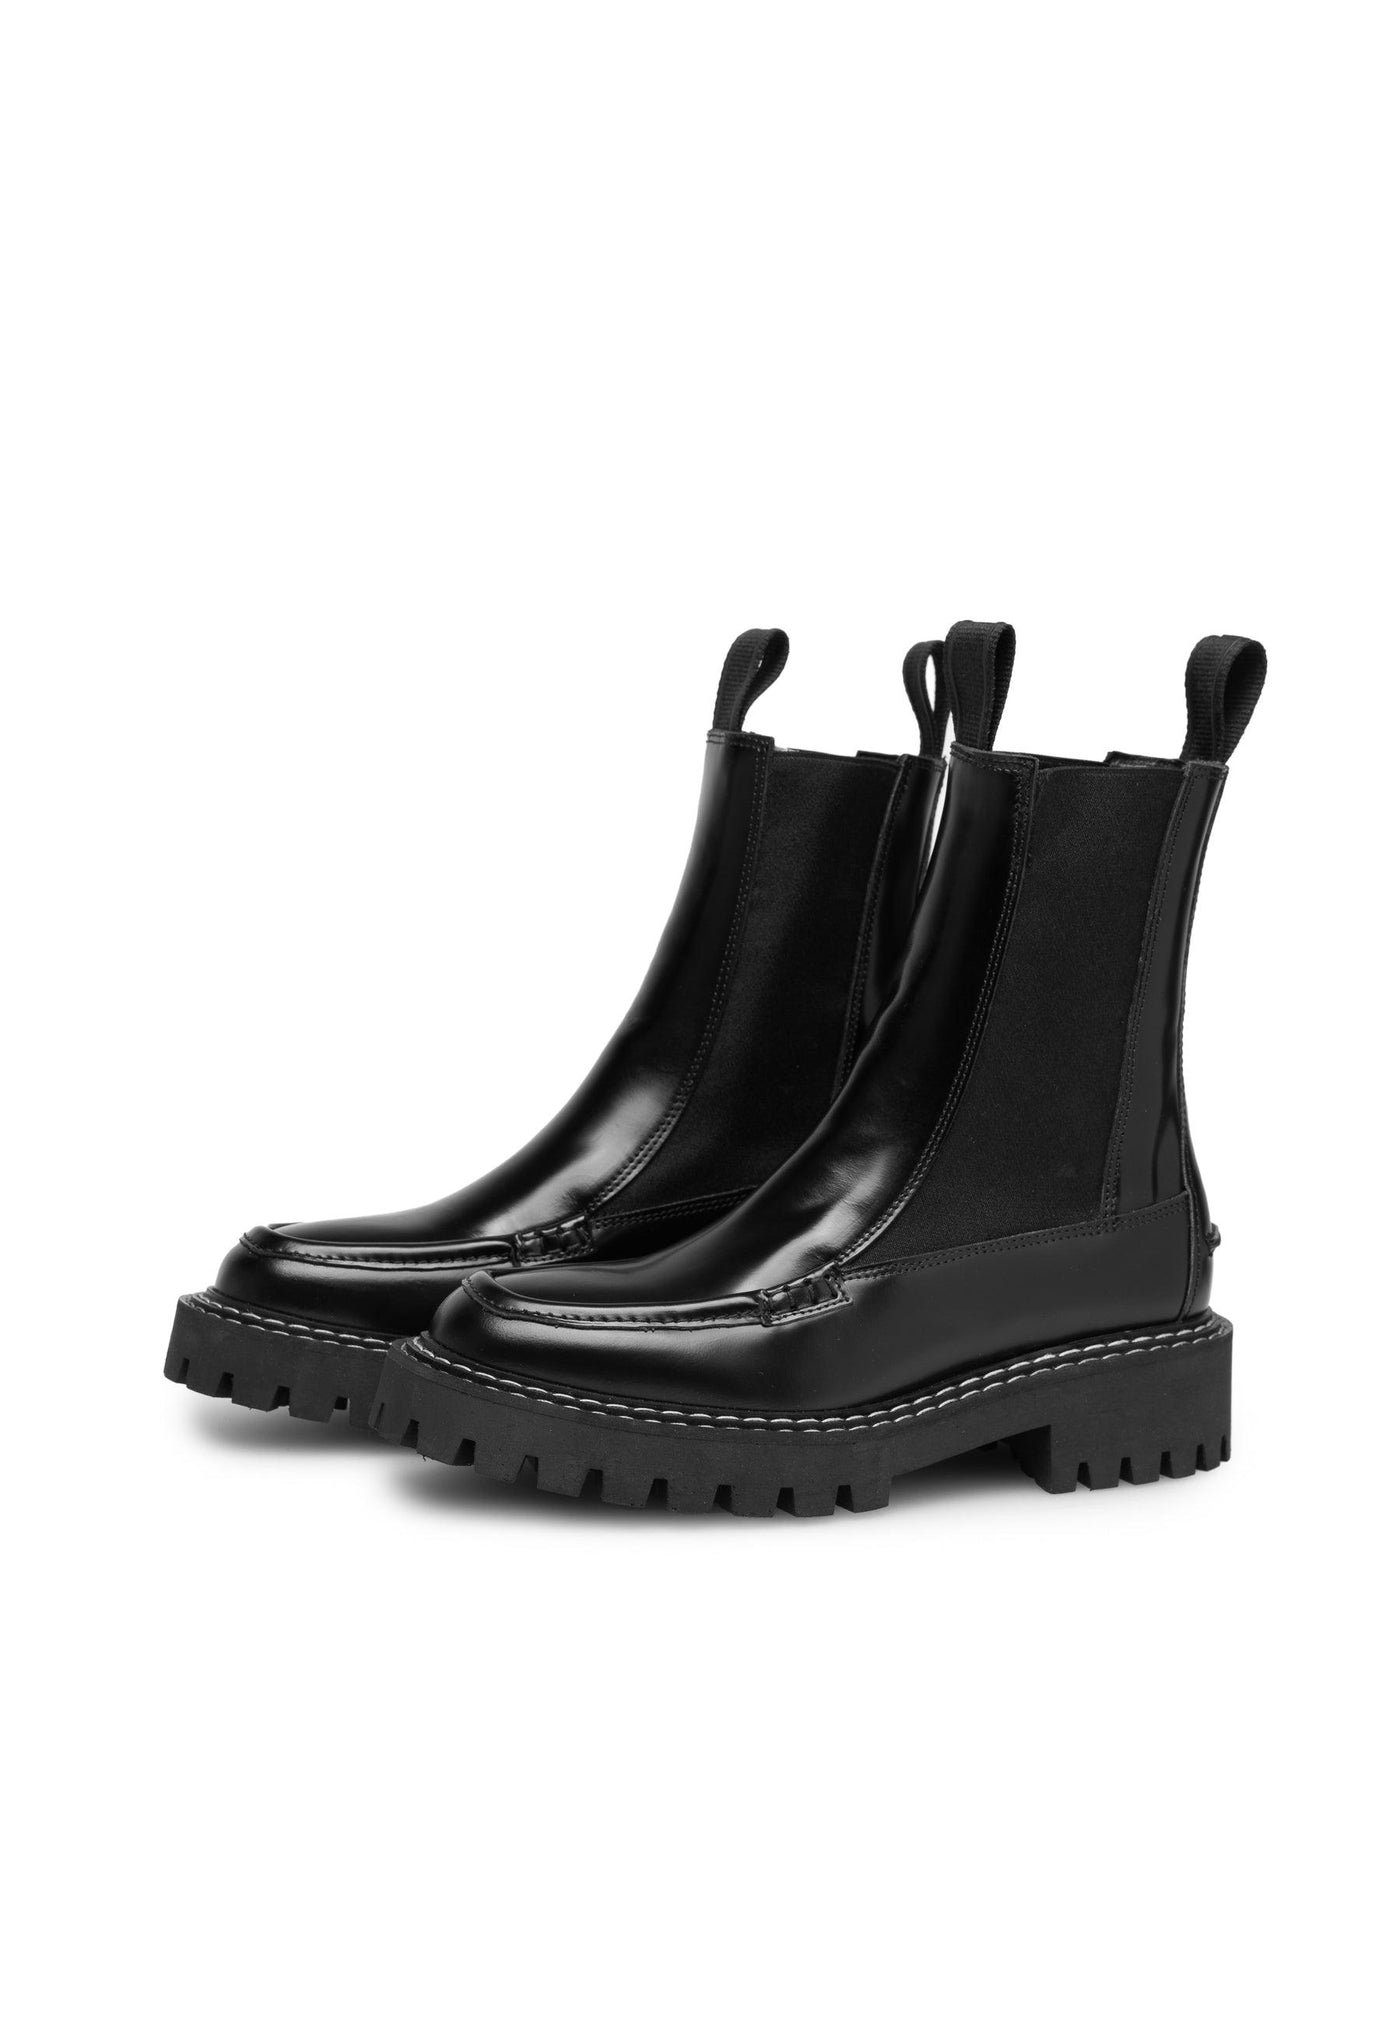 LÄST Ryder Chelsea Boot - Polido Leather - Black Ankle Boots Black